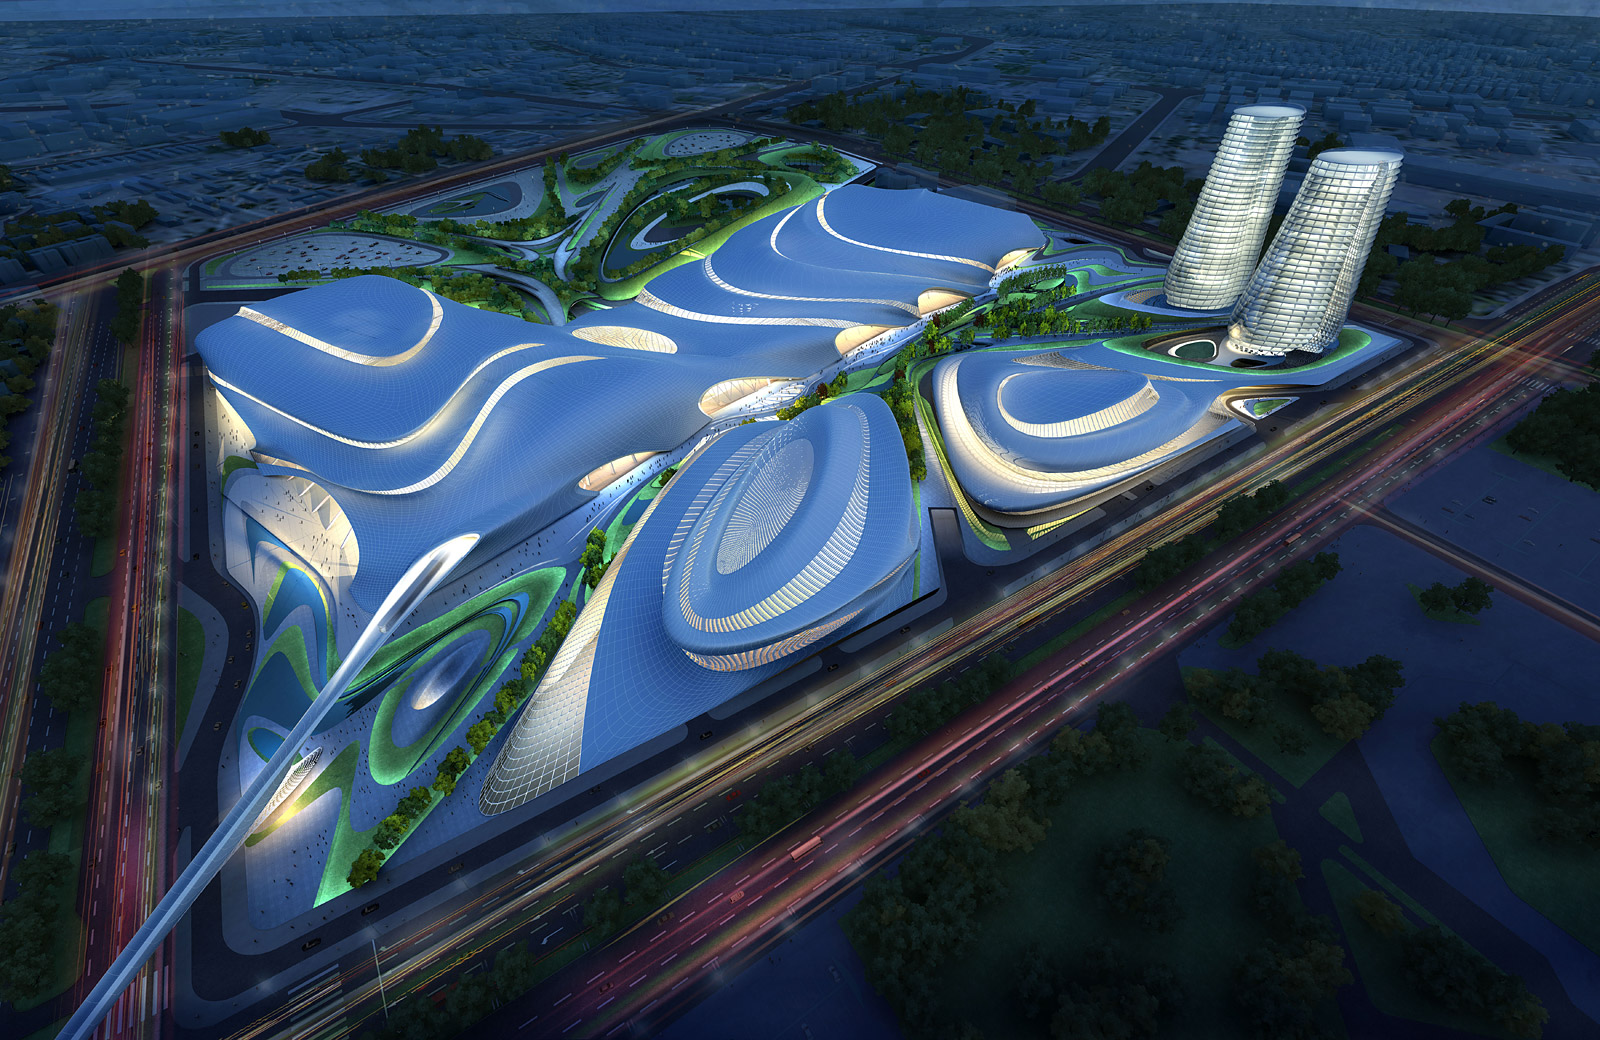 Cairo Expo City, a 450,000 square meter state of the art city for exhibitions and conferences near Cairo Airport, is designed by Zaha Hadid Architects, declared winner in May 24, 2009, and scheduled to be finished in early 2012.